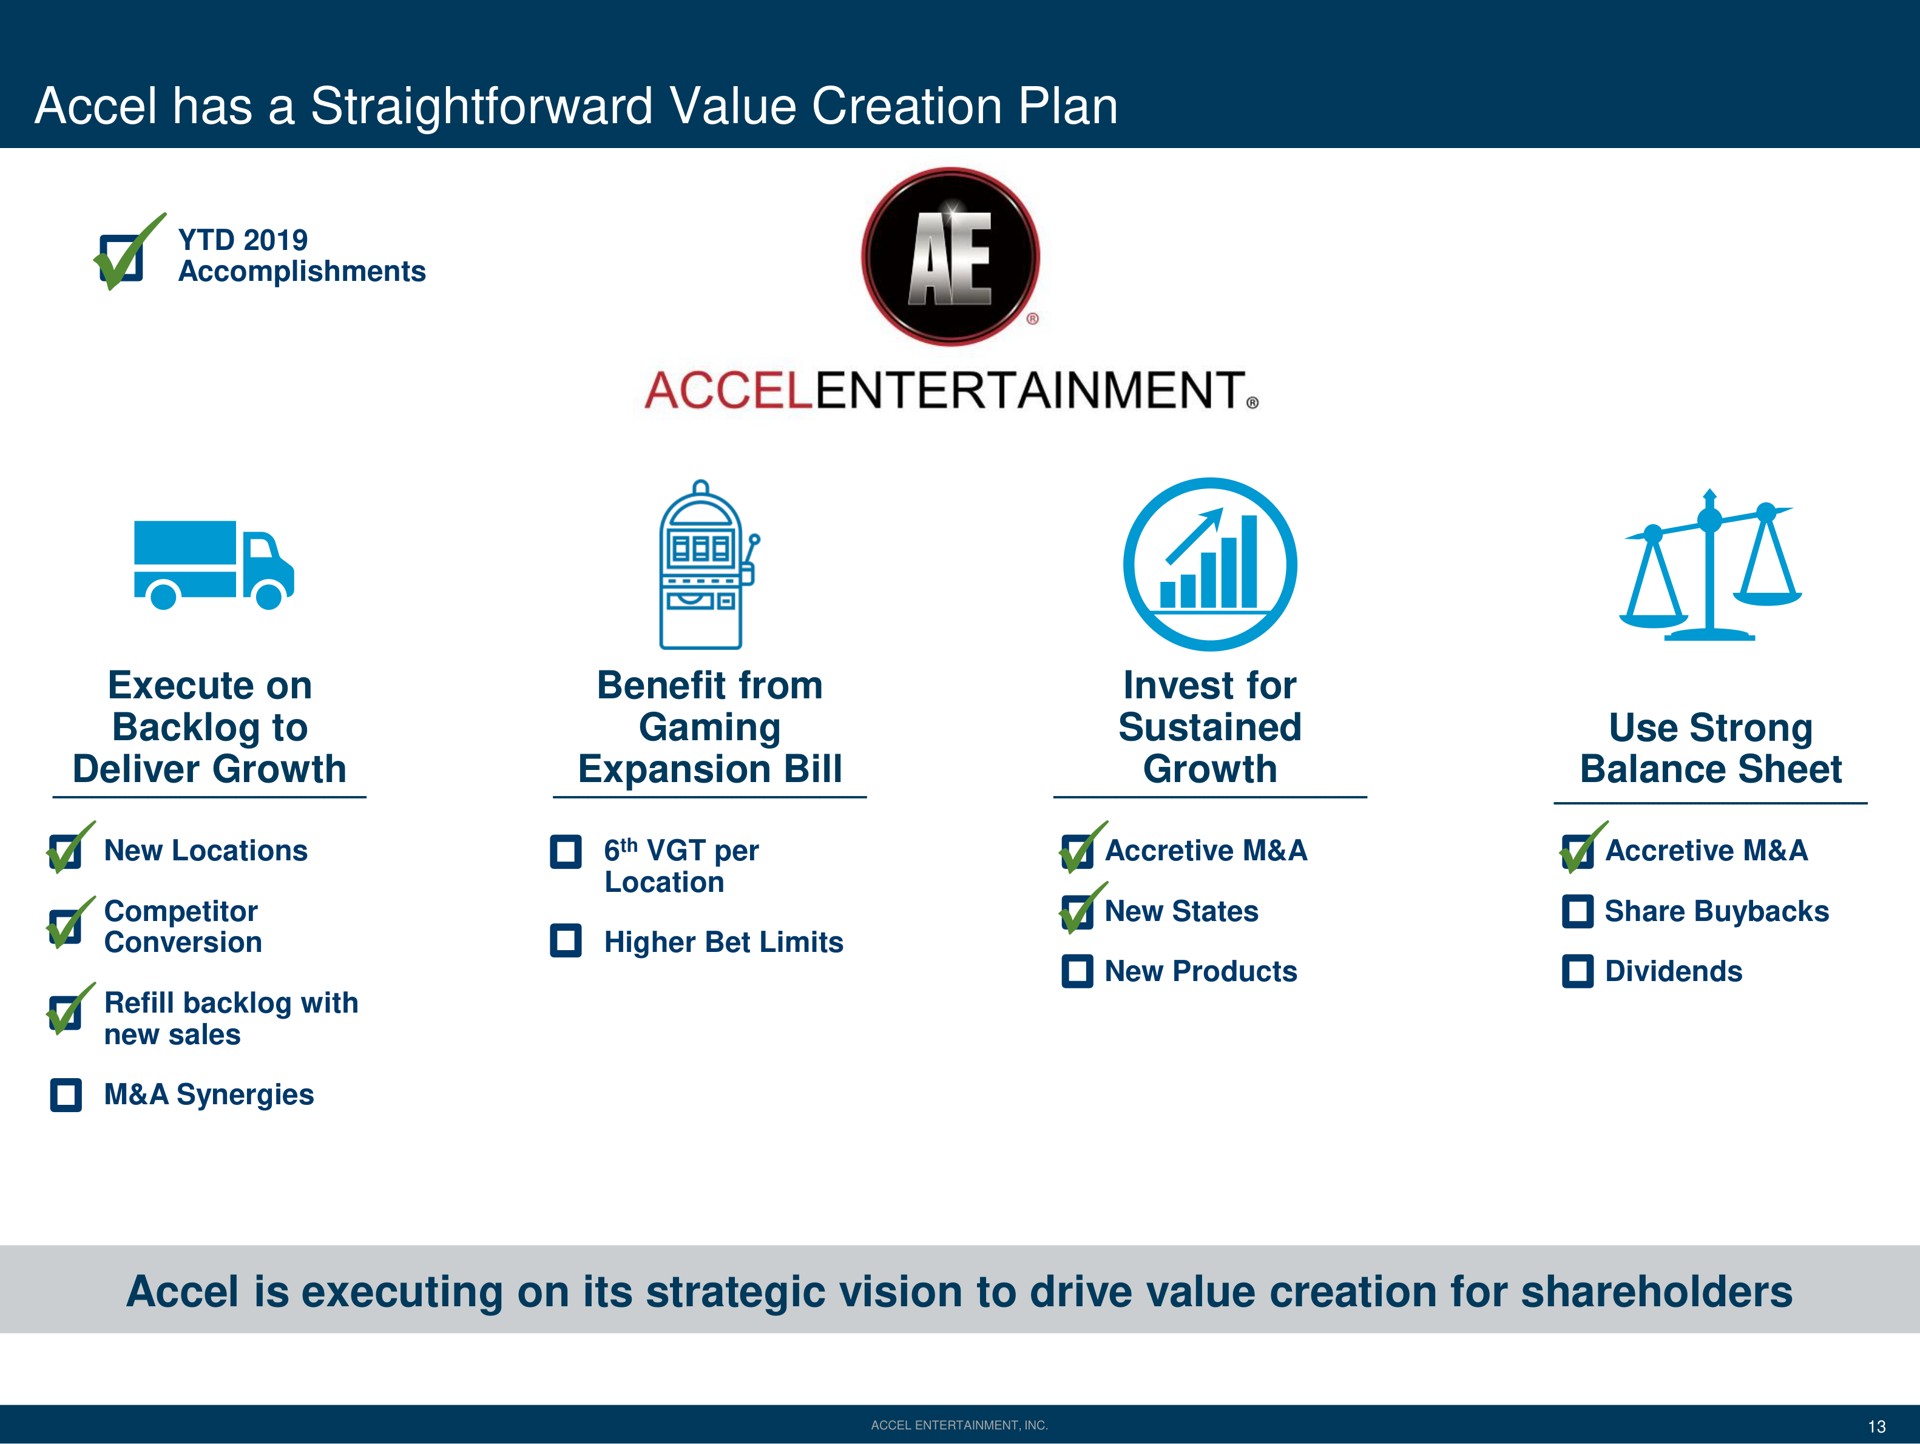 has a straightforward value creation plan execute on backlog to deliver growth benefit from gaming expansion bill invest for sustained growth use strong balance sheet is executing on its strategic vision to drive value creation for shareholders fouls new locations refill with per accretive dividends | Accel Entertaiment